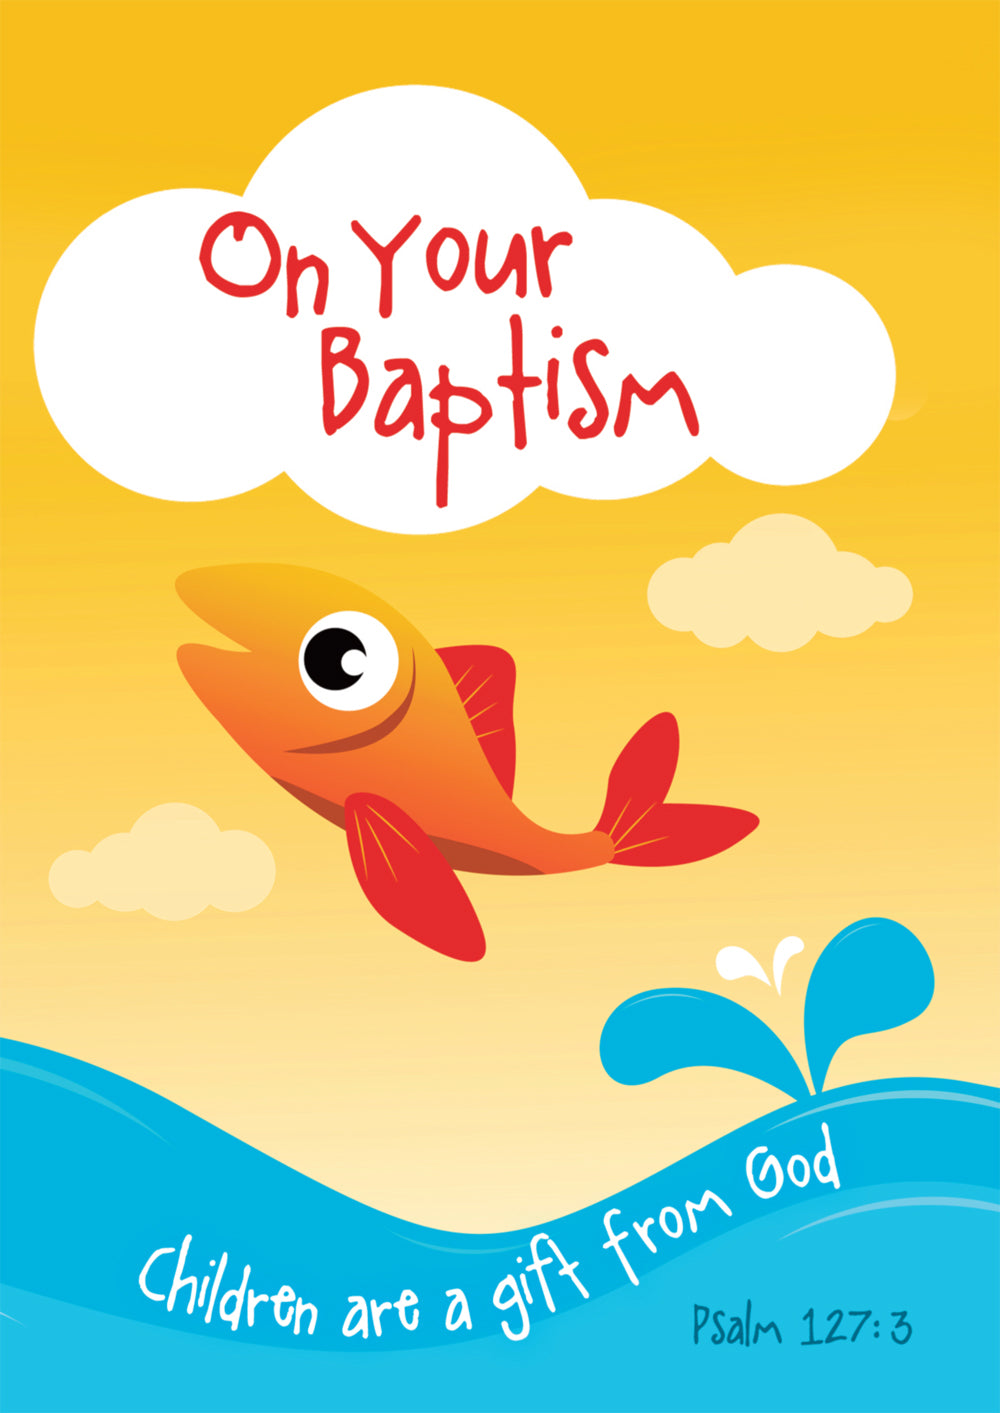 On Your Baptism - FishOn Your Baptism - Fish